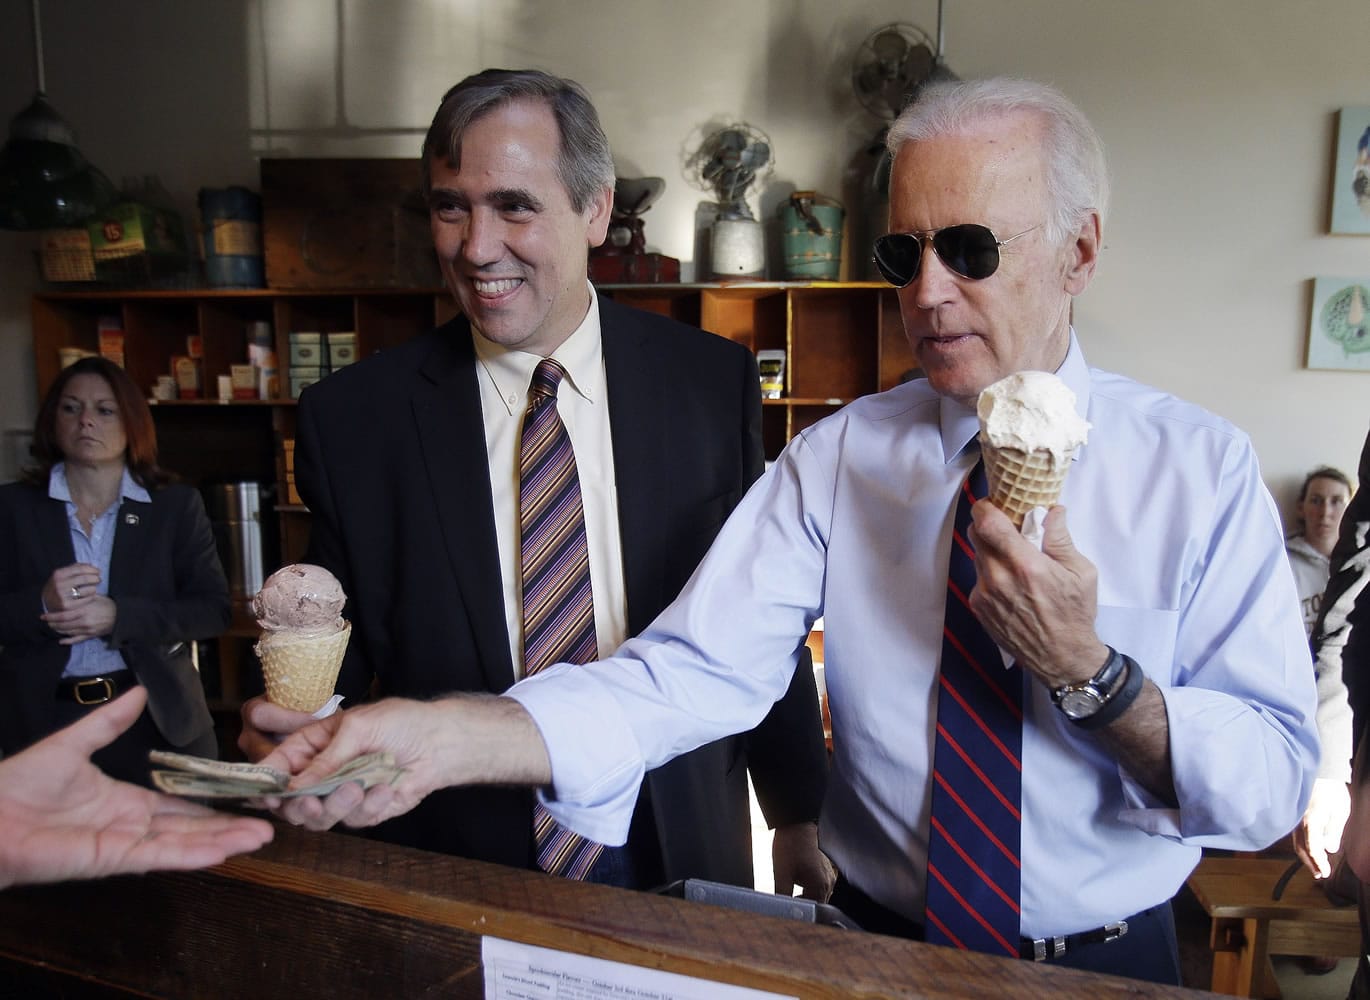 Vice President Joe Biden, right, pays for ice cream cones at Salt &amp; Straw for himself and U.S. Sen. Jeff Merkley after a campaign rally Wednesday in Portland.